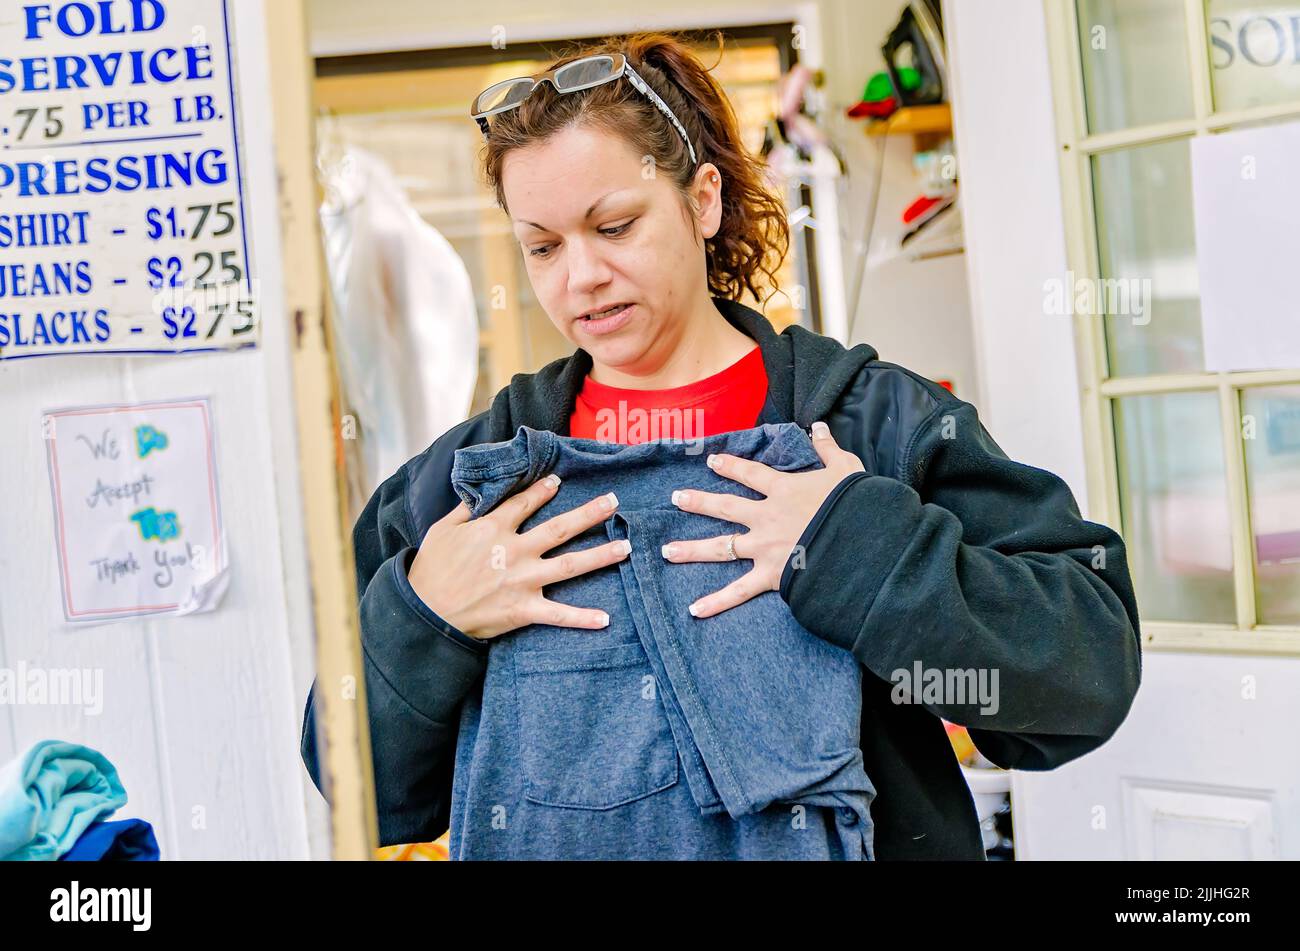 A woman folds laundry at a laundromat, Feb. 23, 2013, in Columbus, Mississippi. The job pays minimum wage. Stock Photo